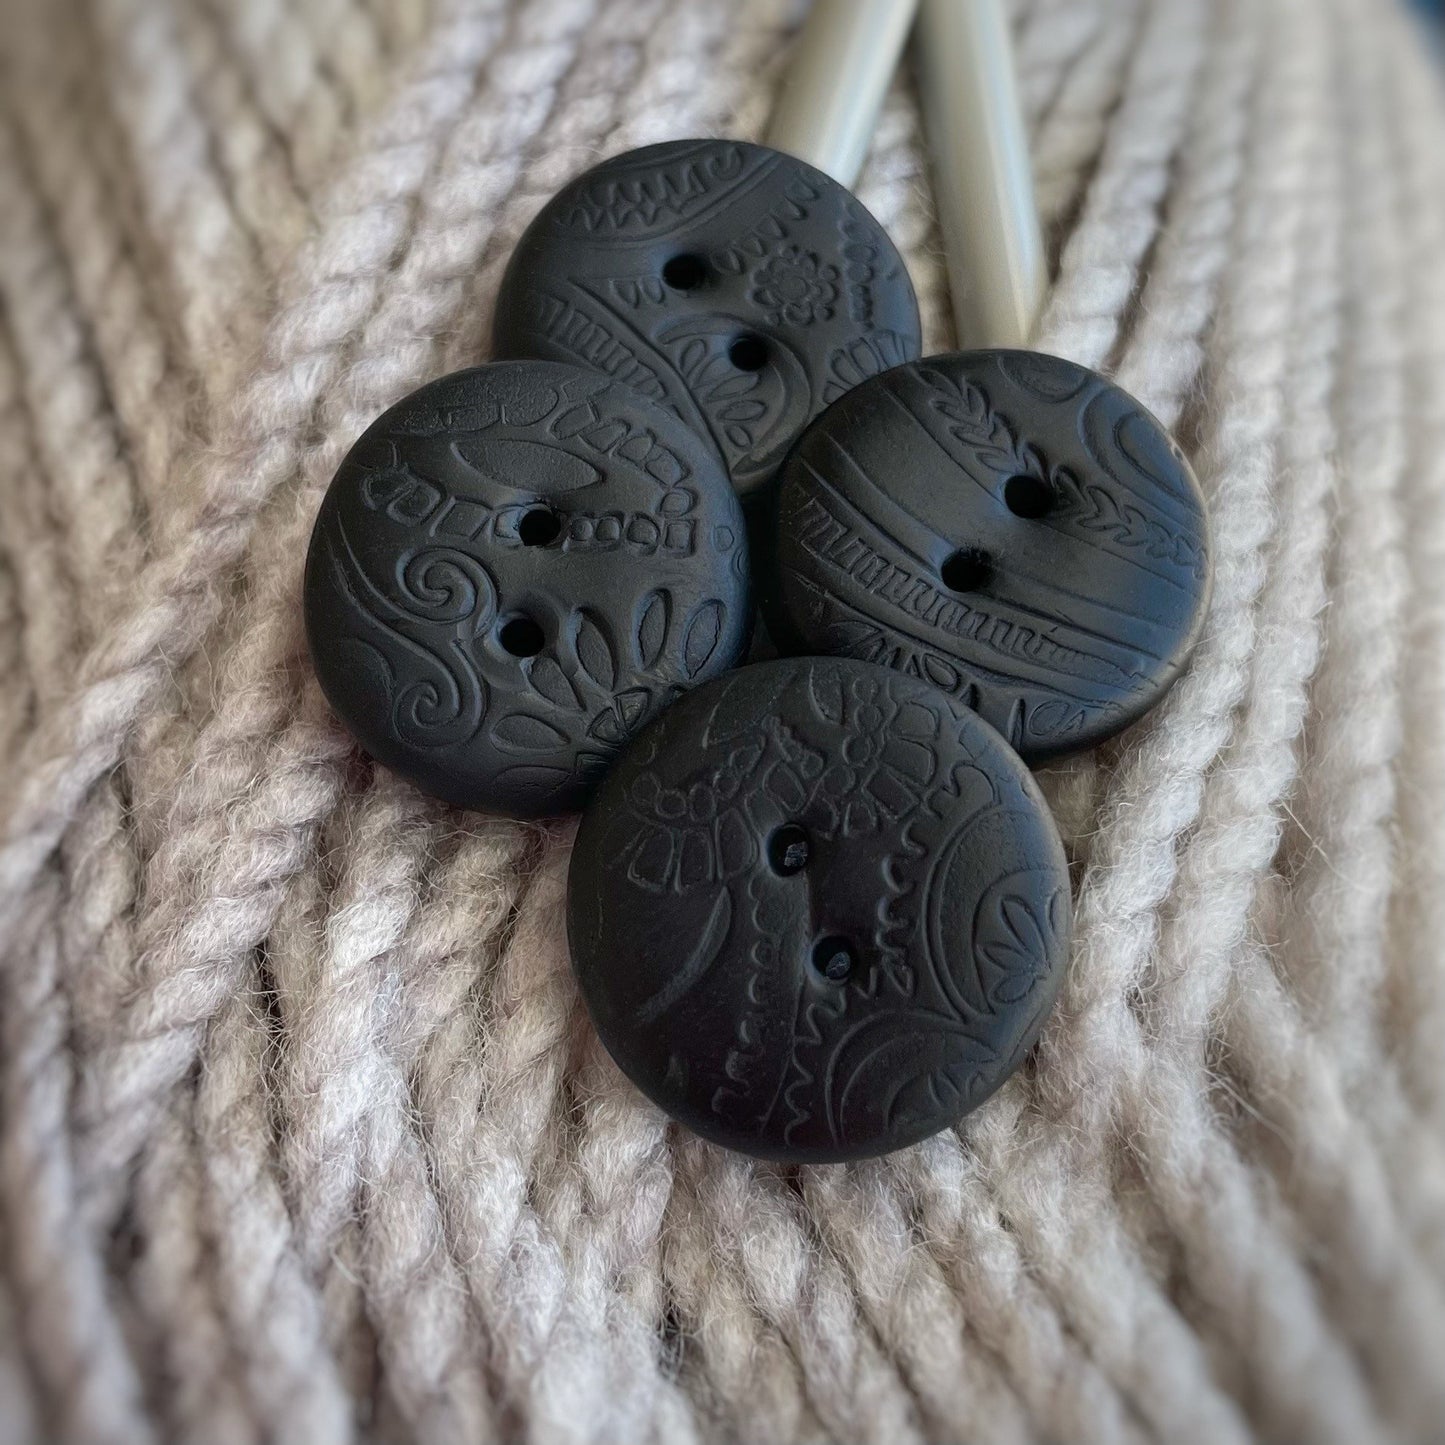 Black Round Abstract Quality Polymer Clay Buttons with Impression- set of 4 - 20mm